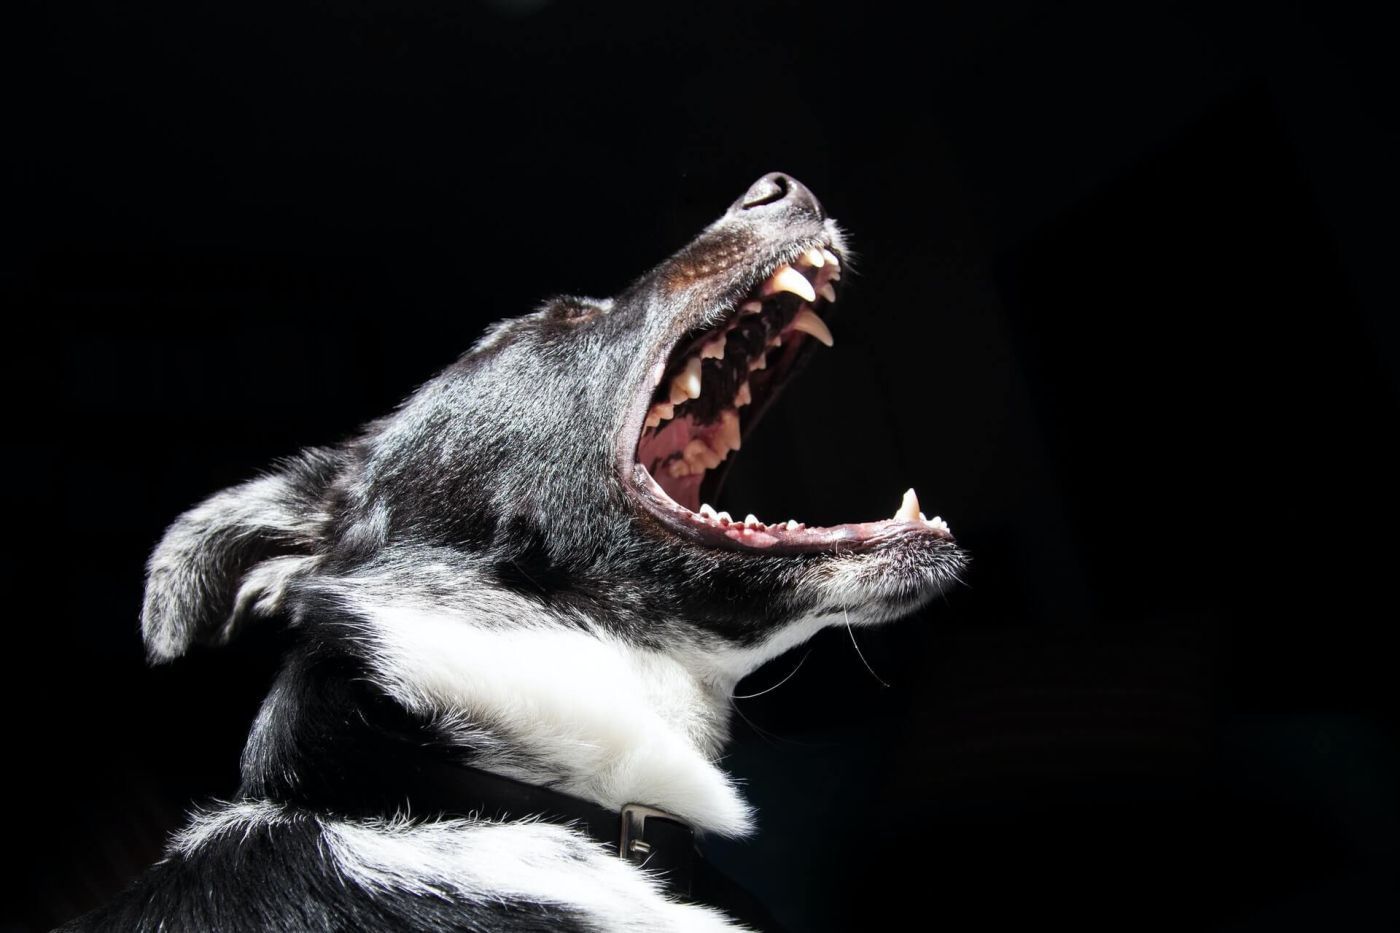 A black and white dog is yawning with its mouth open.